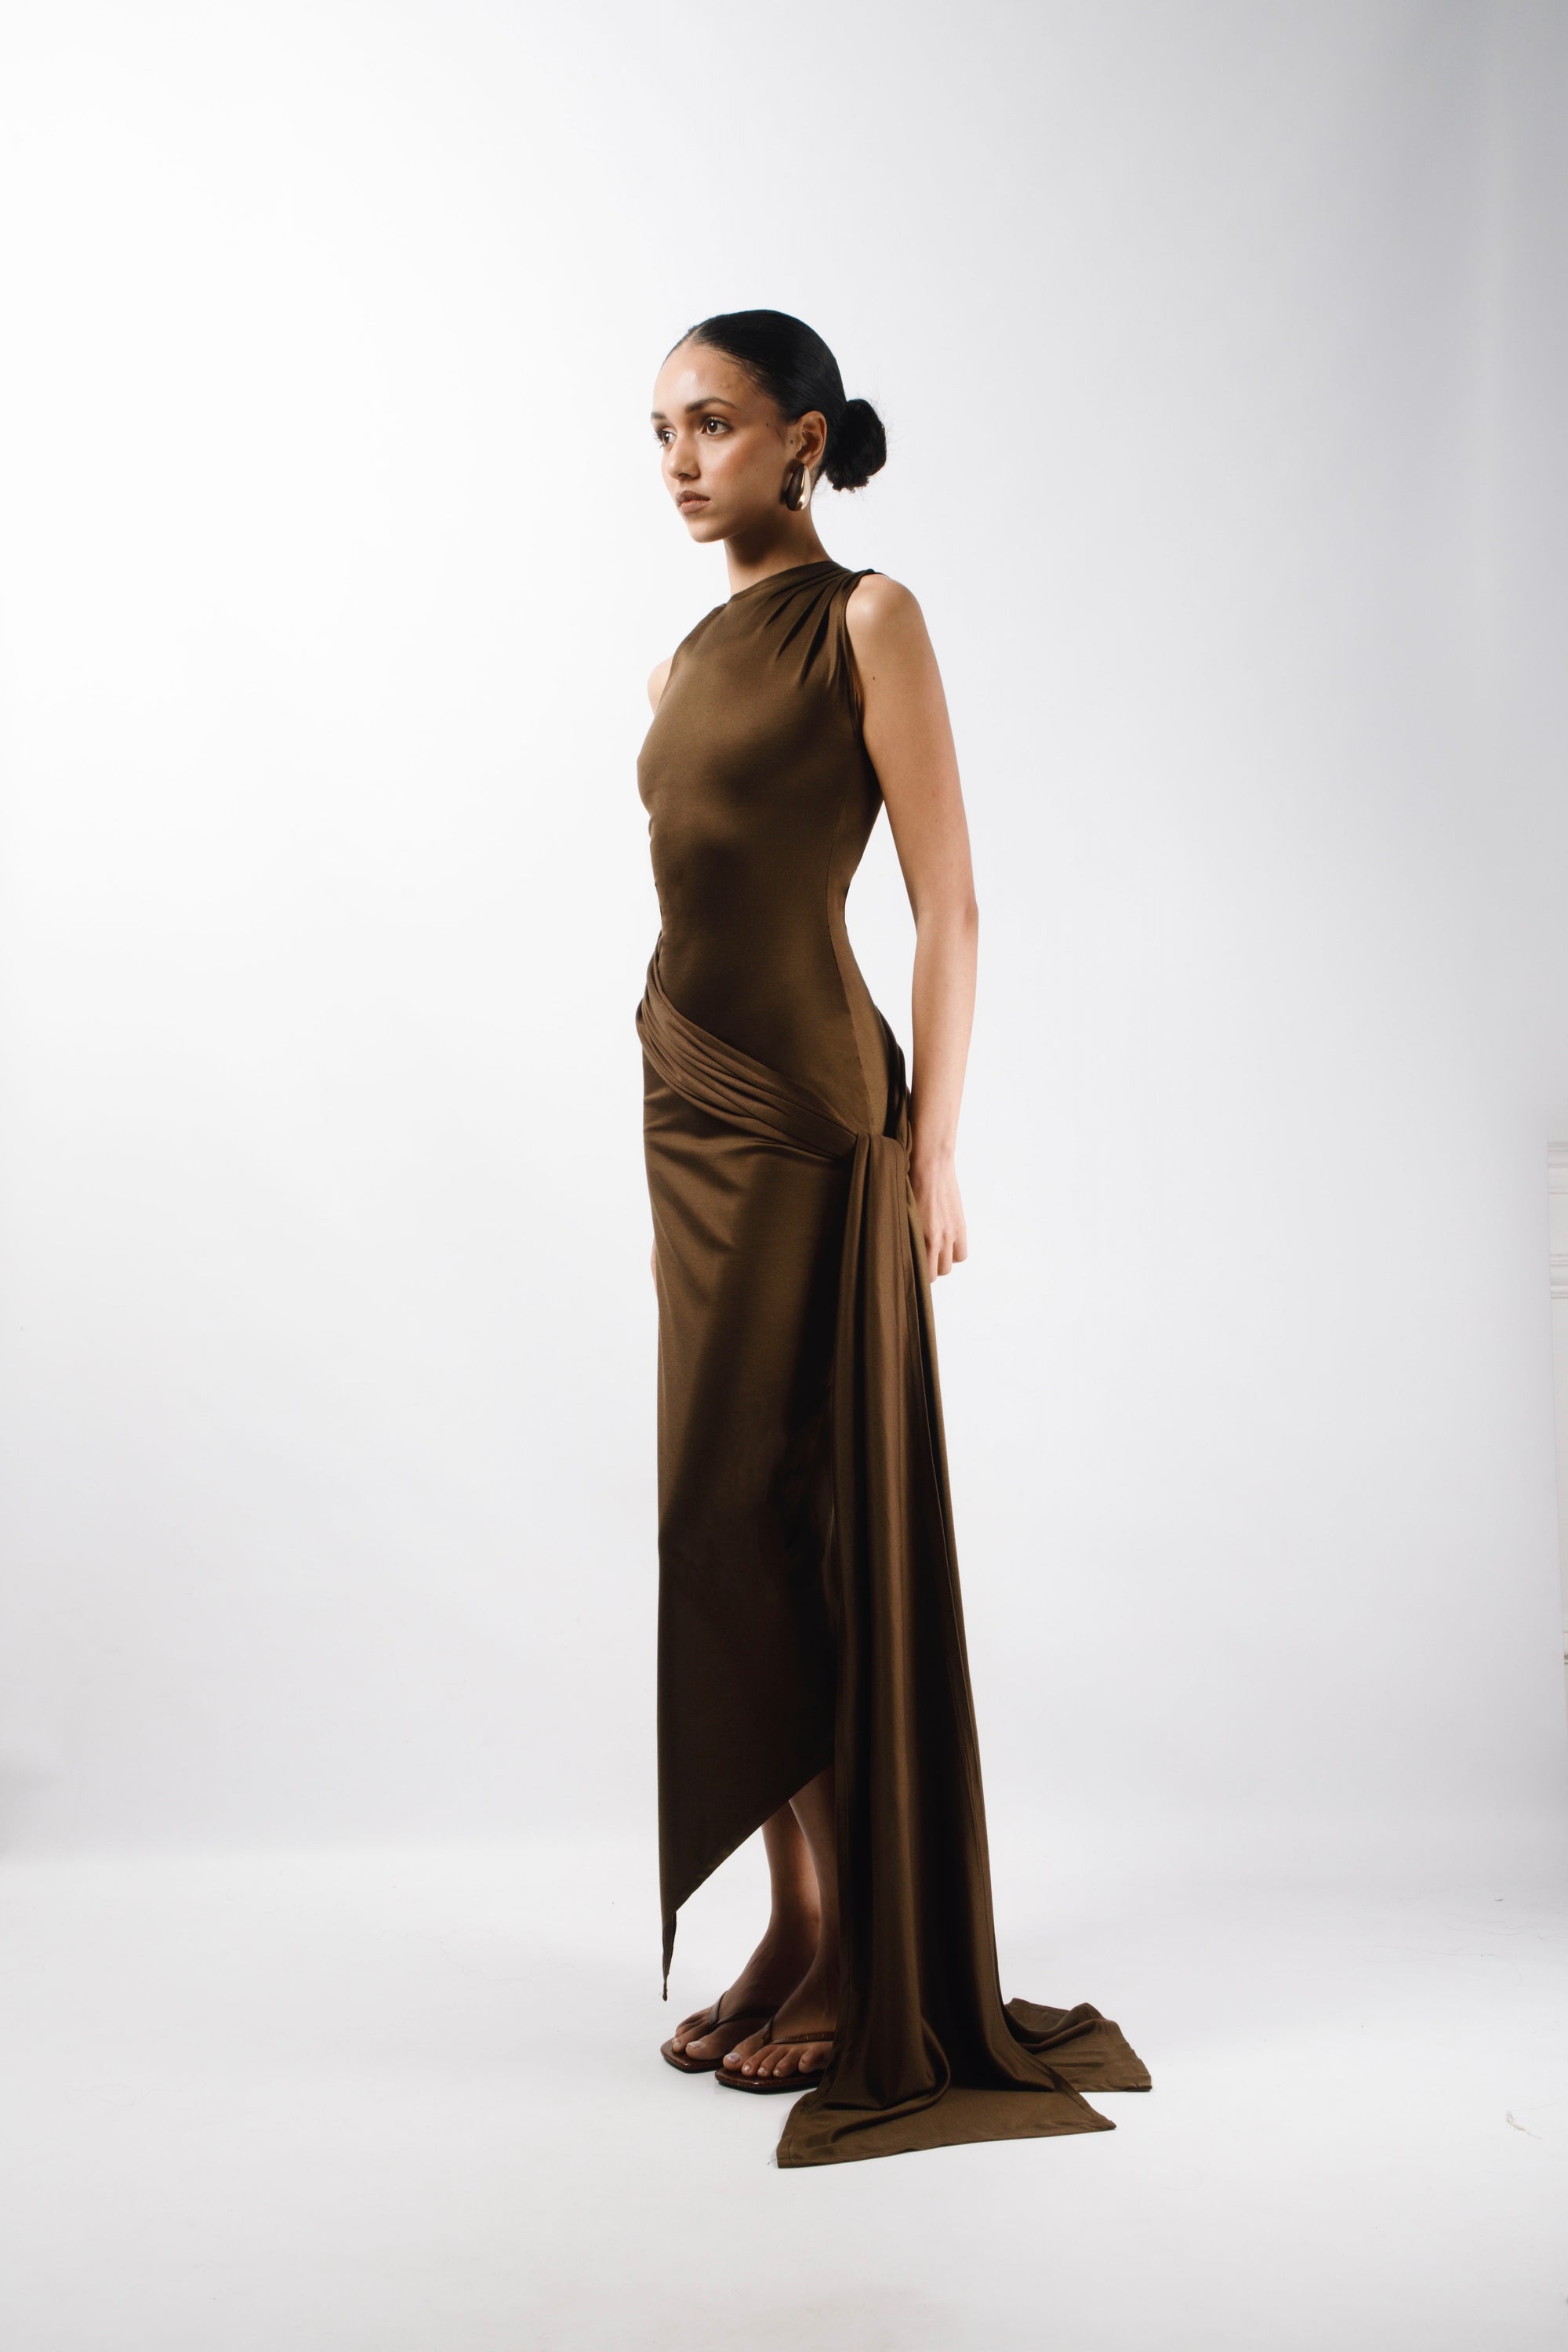 Long Asymmetric Dress in brown Gold Silk fabric with a pleated sleeve and an adjustable sleeve, the Dress features a long train attached from the waist and an opening slit that hits at the ankle - side